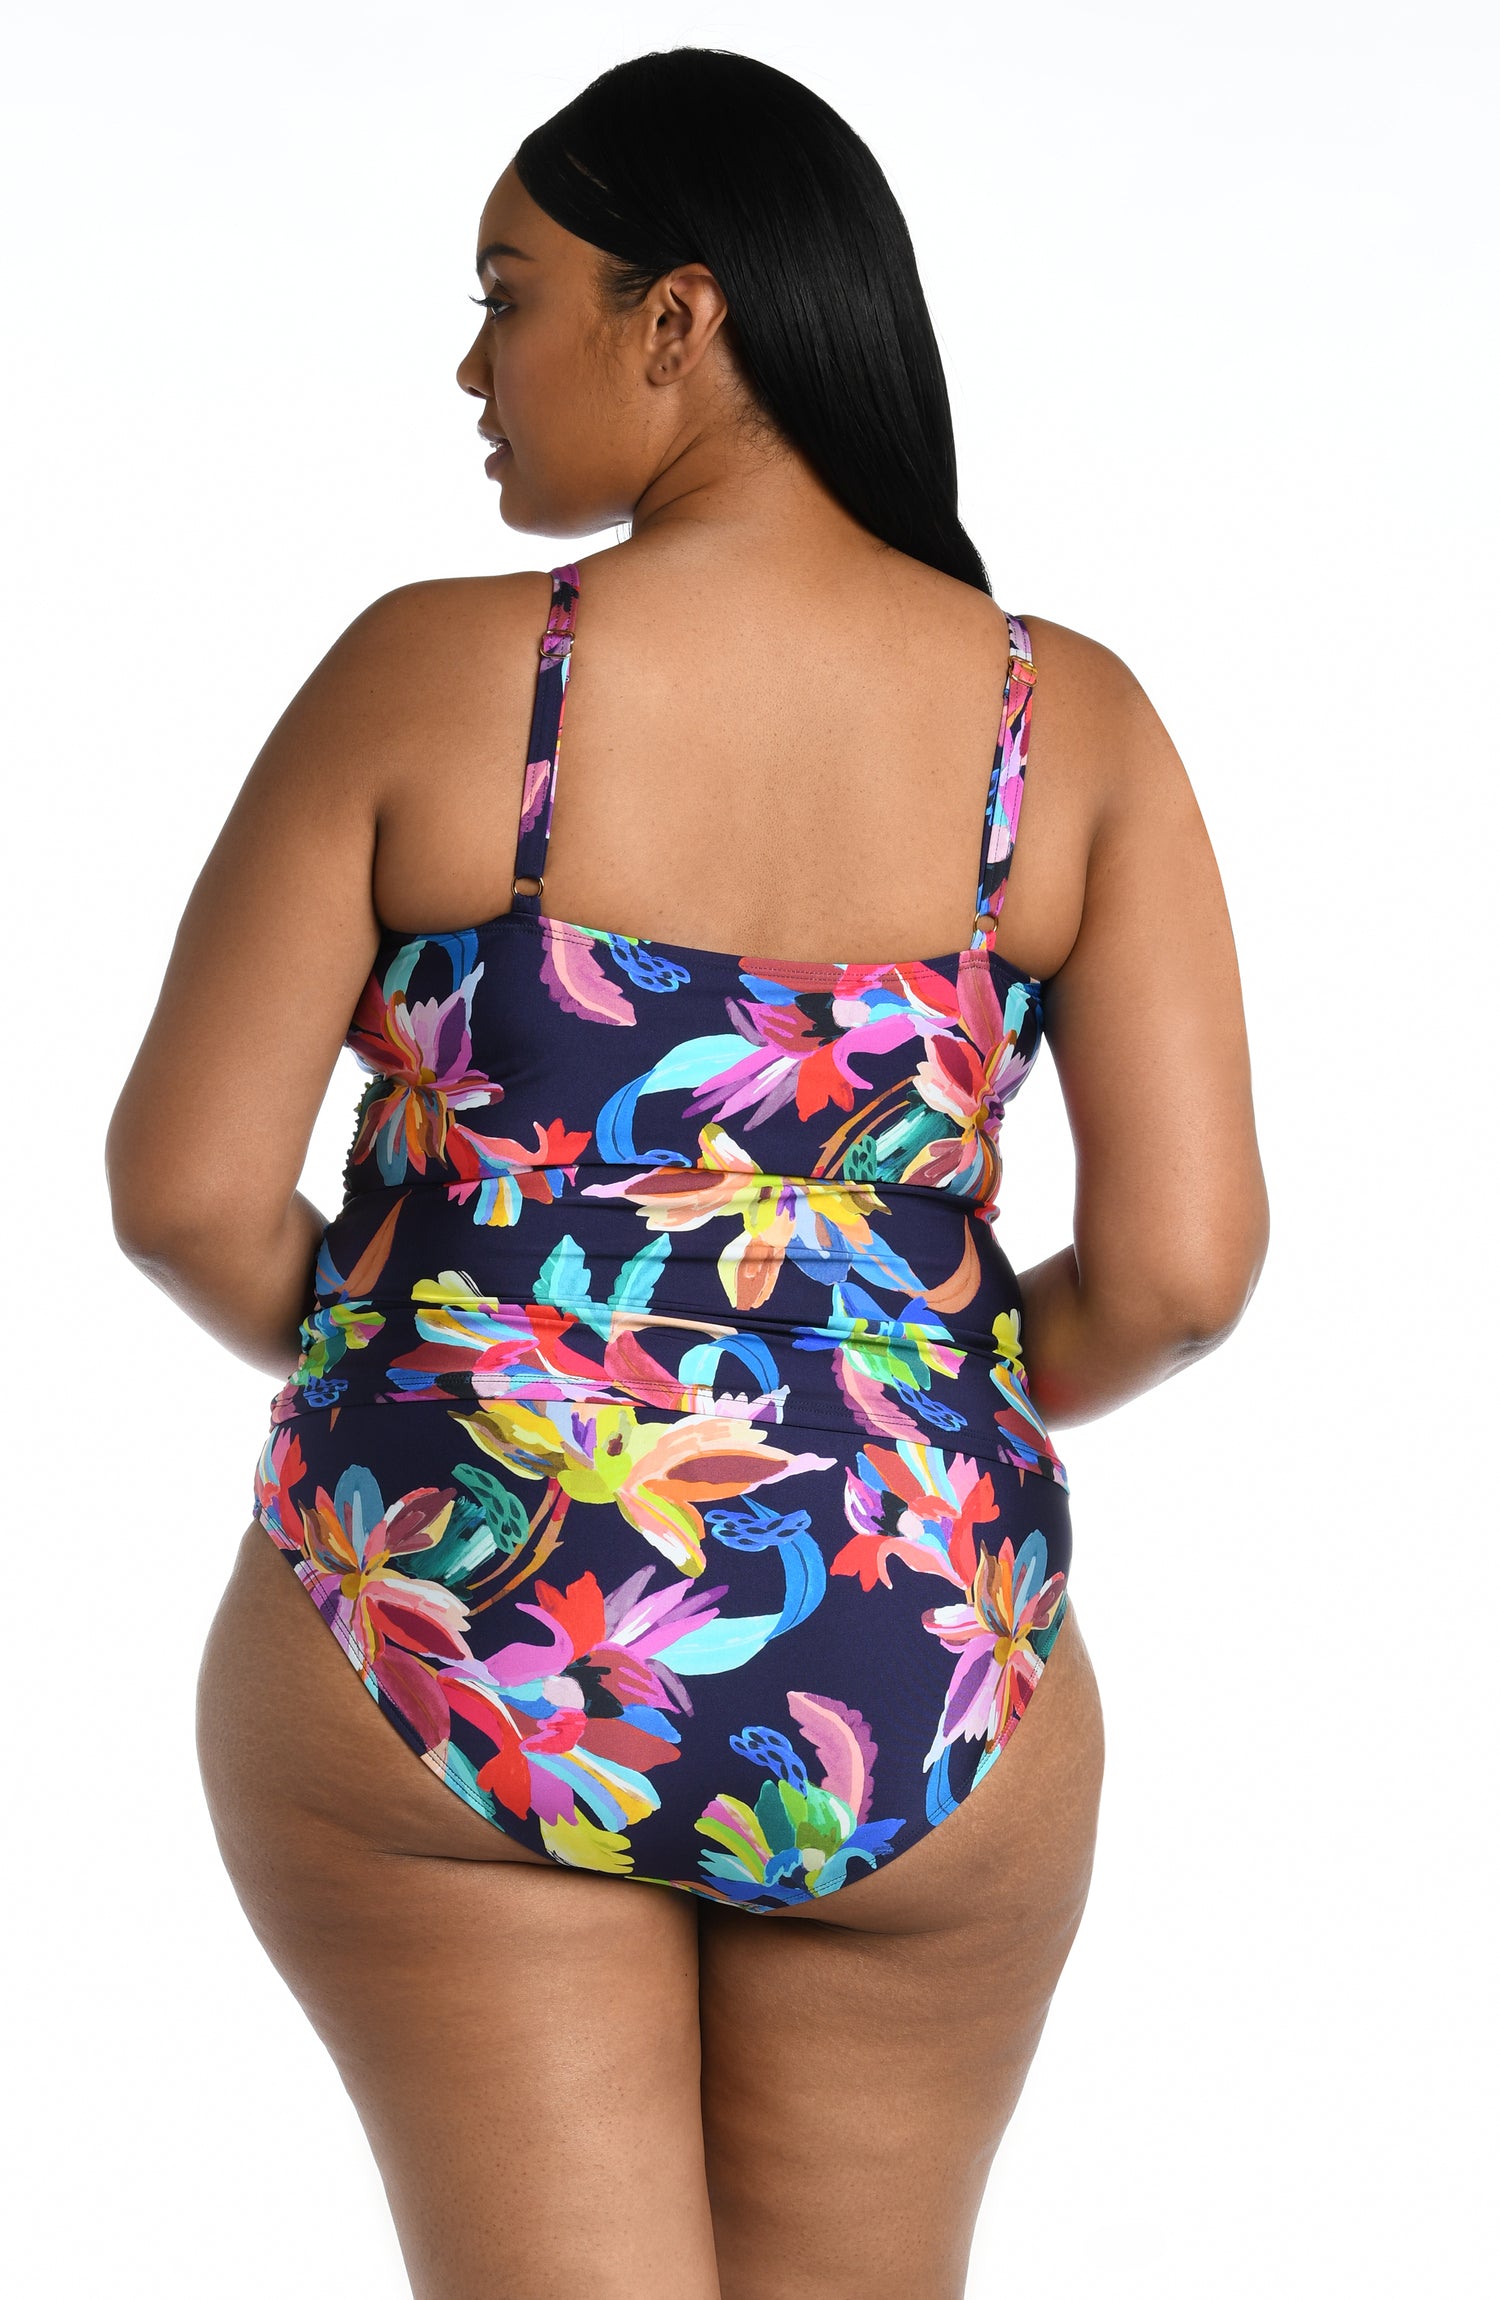 Model is wearing a multi-colored tropical printed tankini swimsuit top from our By the Sea collection.